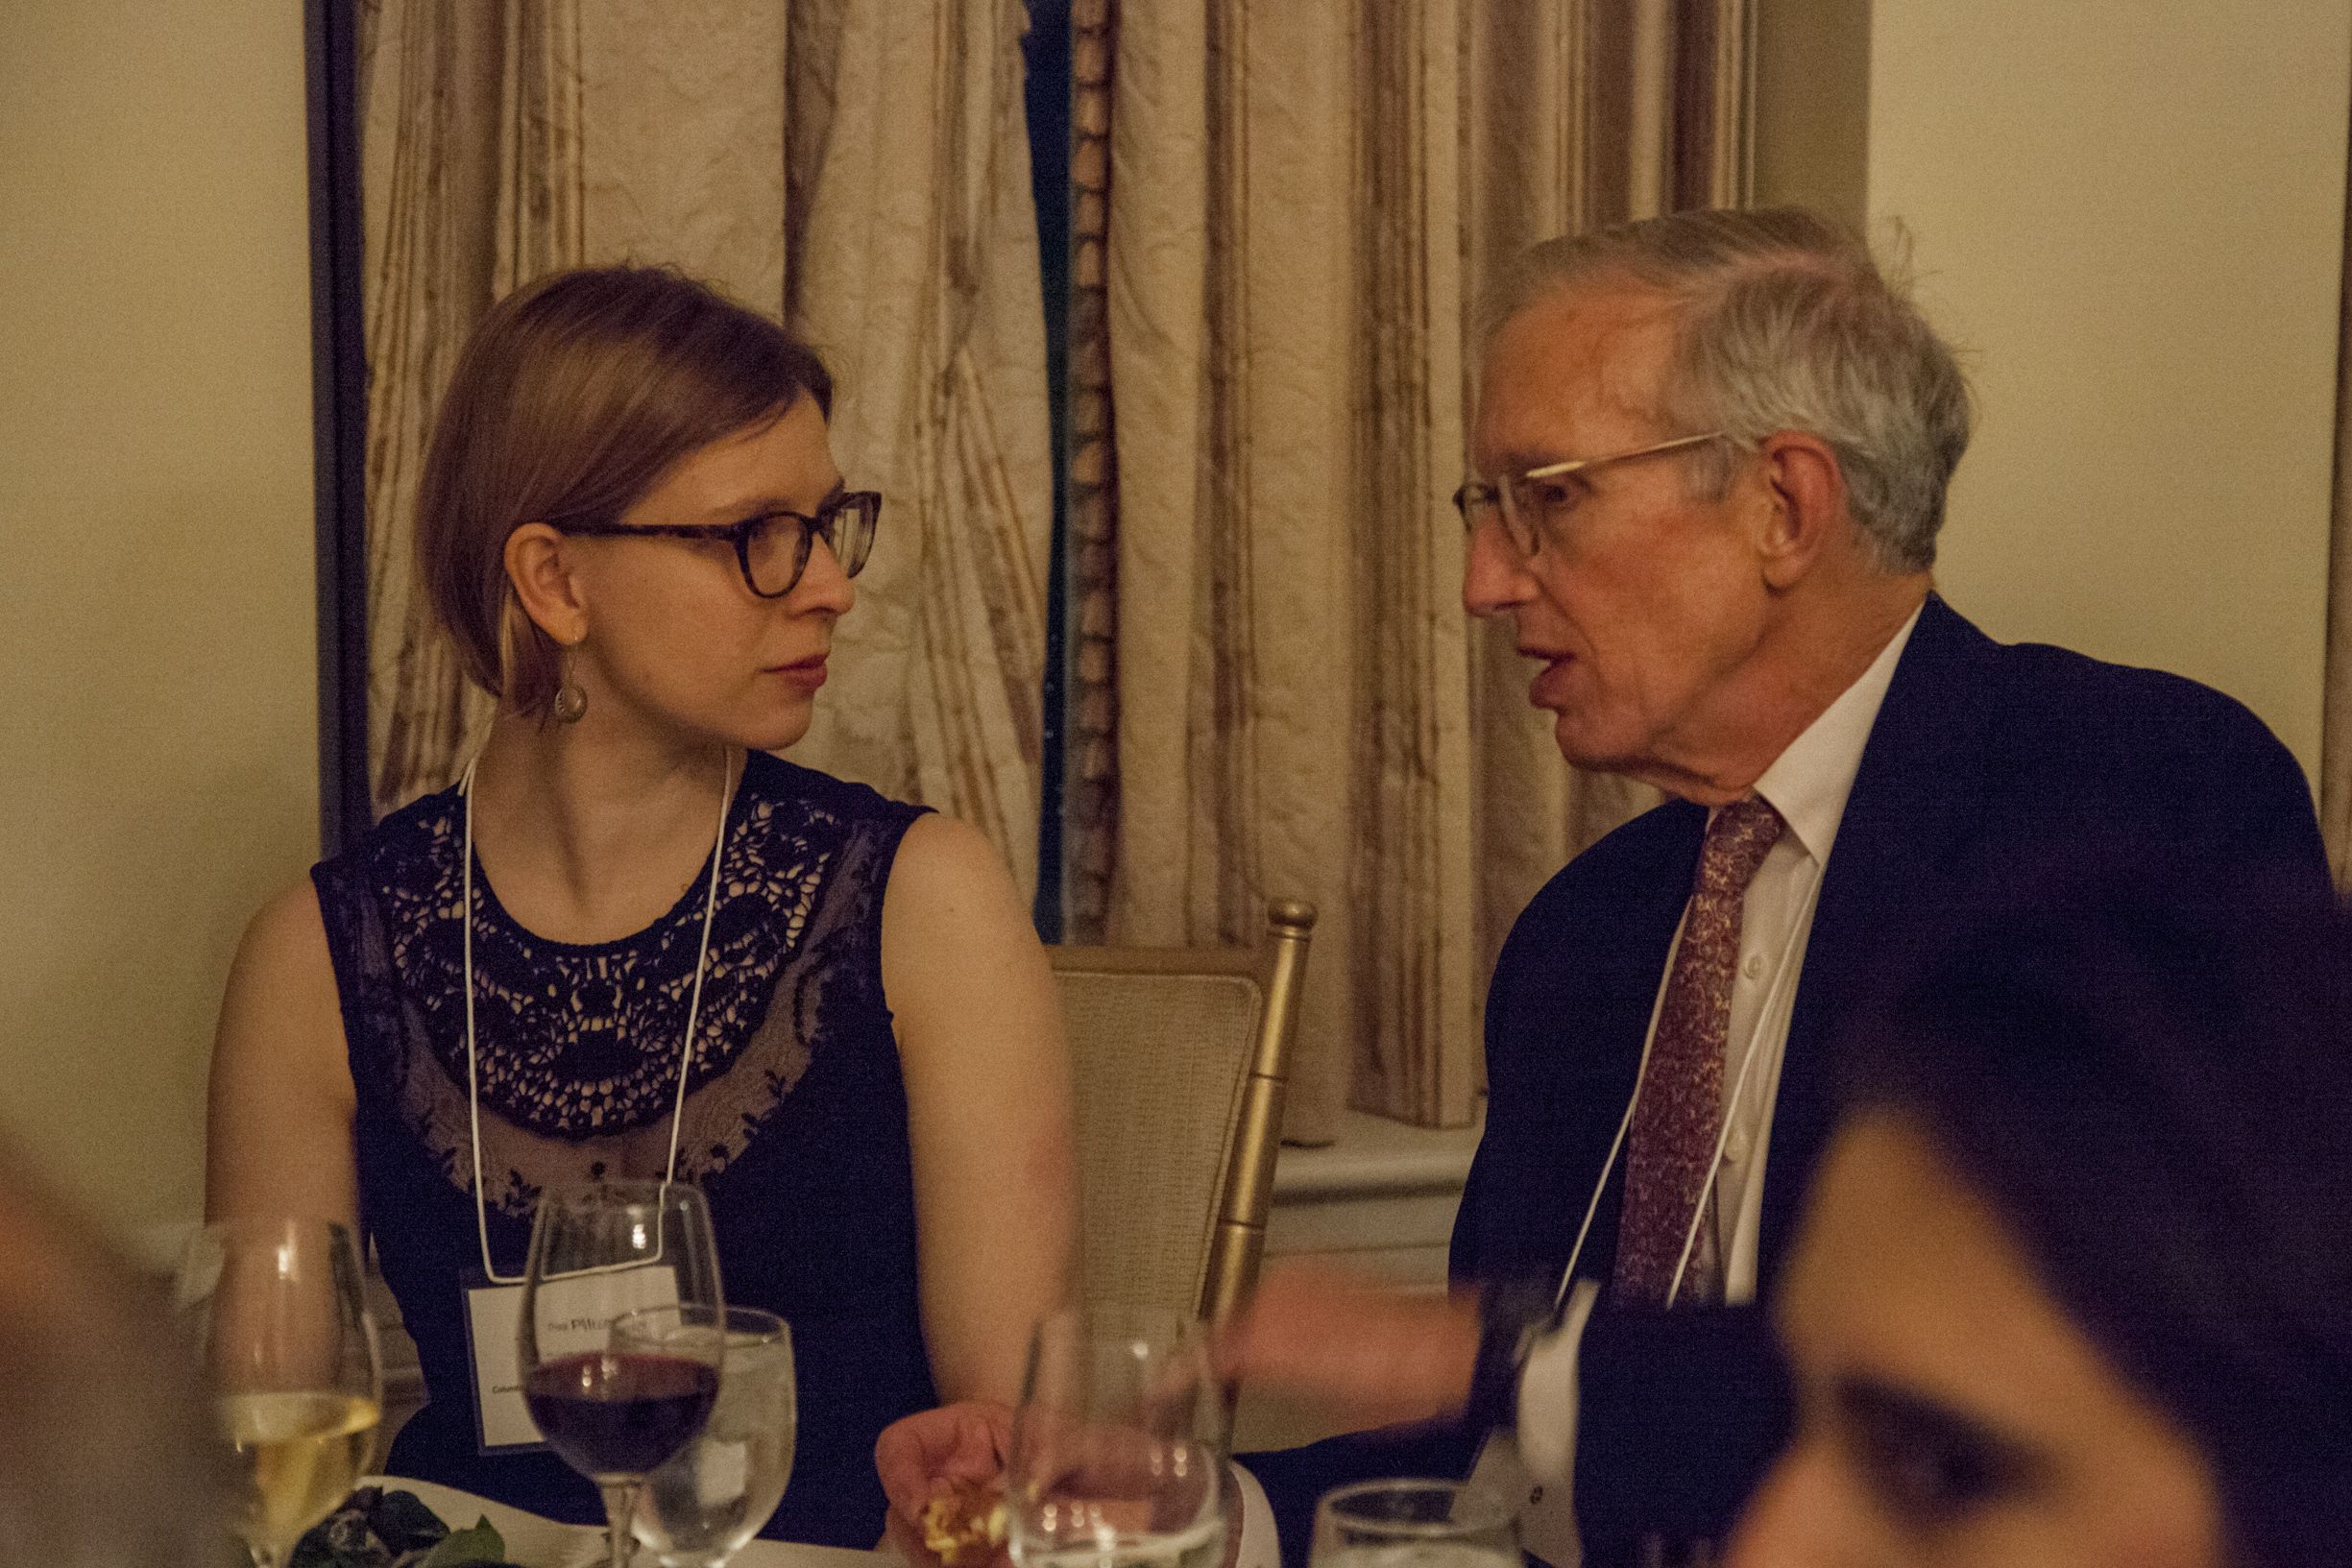 Student fellow Liz Scherffius with Richard Moore of the Board of Directors. Image by Jin Ding. United States, 2018.